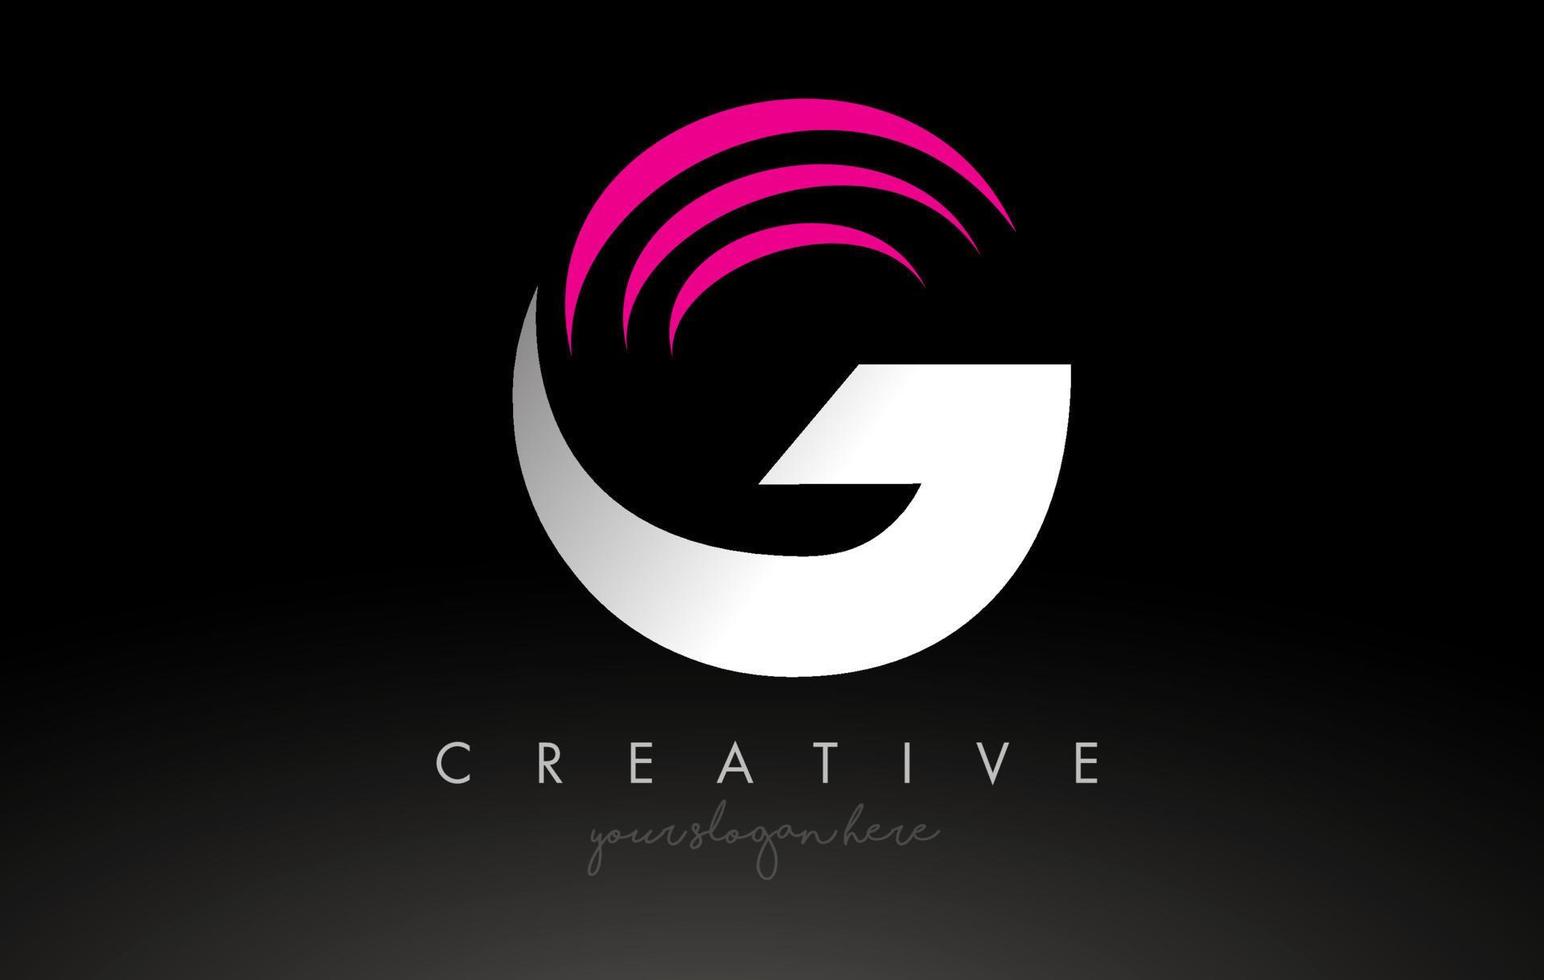 G White and Pink Swoosh Letter Logo Letter Design with Creative Concept Vector Idea